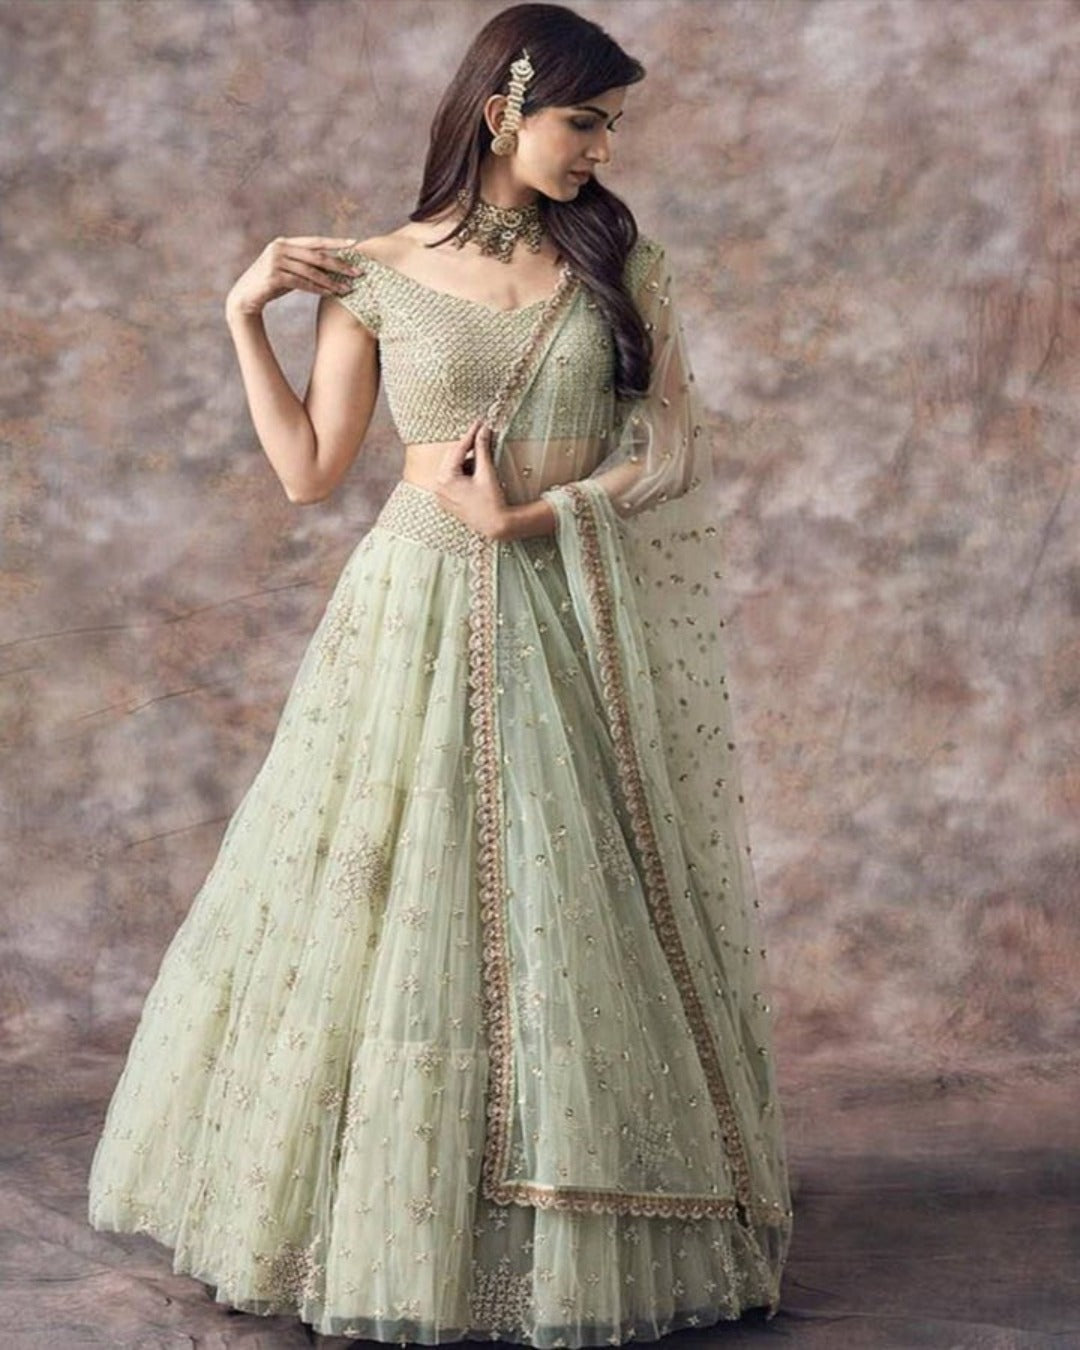 Bottle Green color Lehenga Choli with Heavy Embroidery work